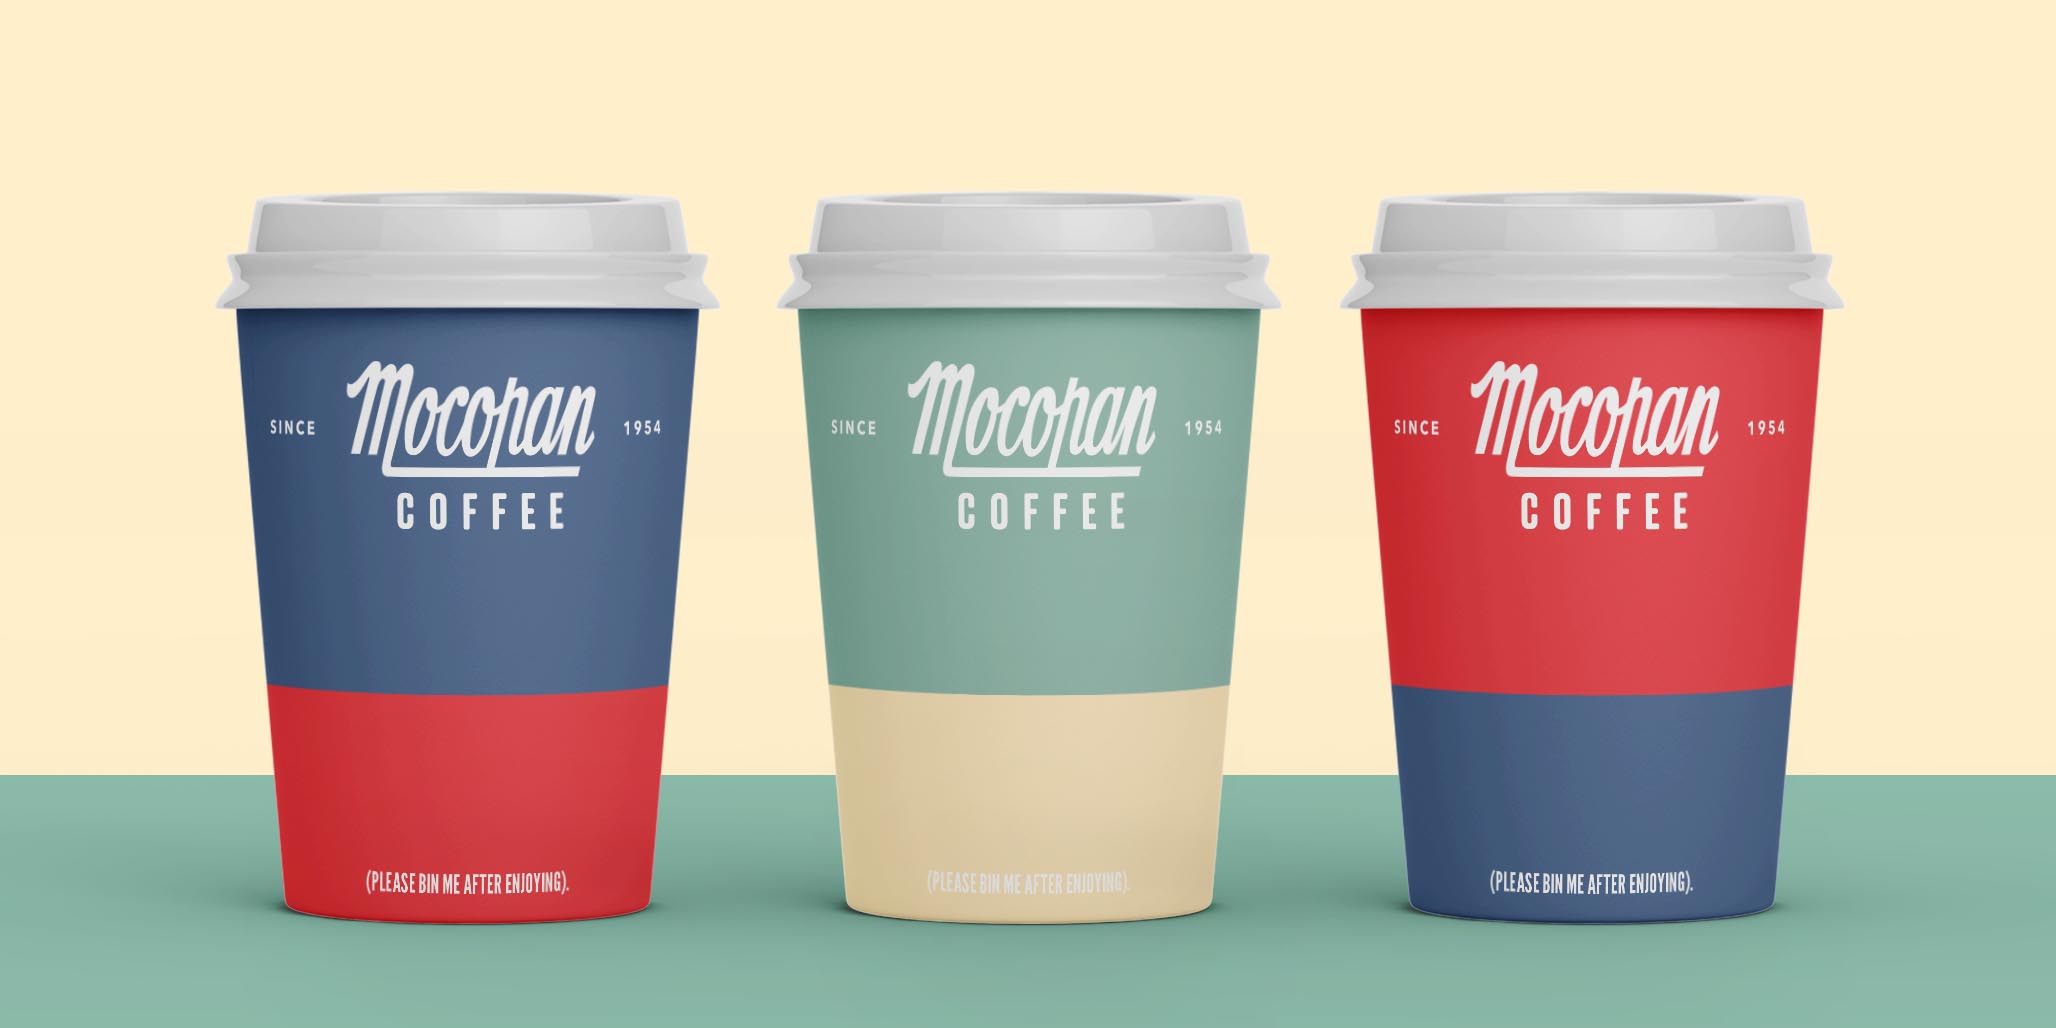 Brand design agency, Percept, creates new packaging design for Suntory's Mocopan Coffee as part of a brand refresh project, image F